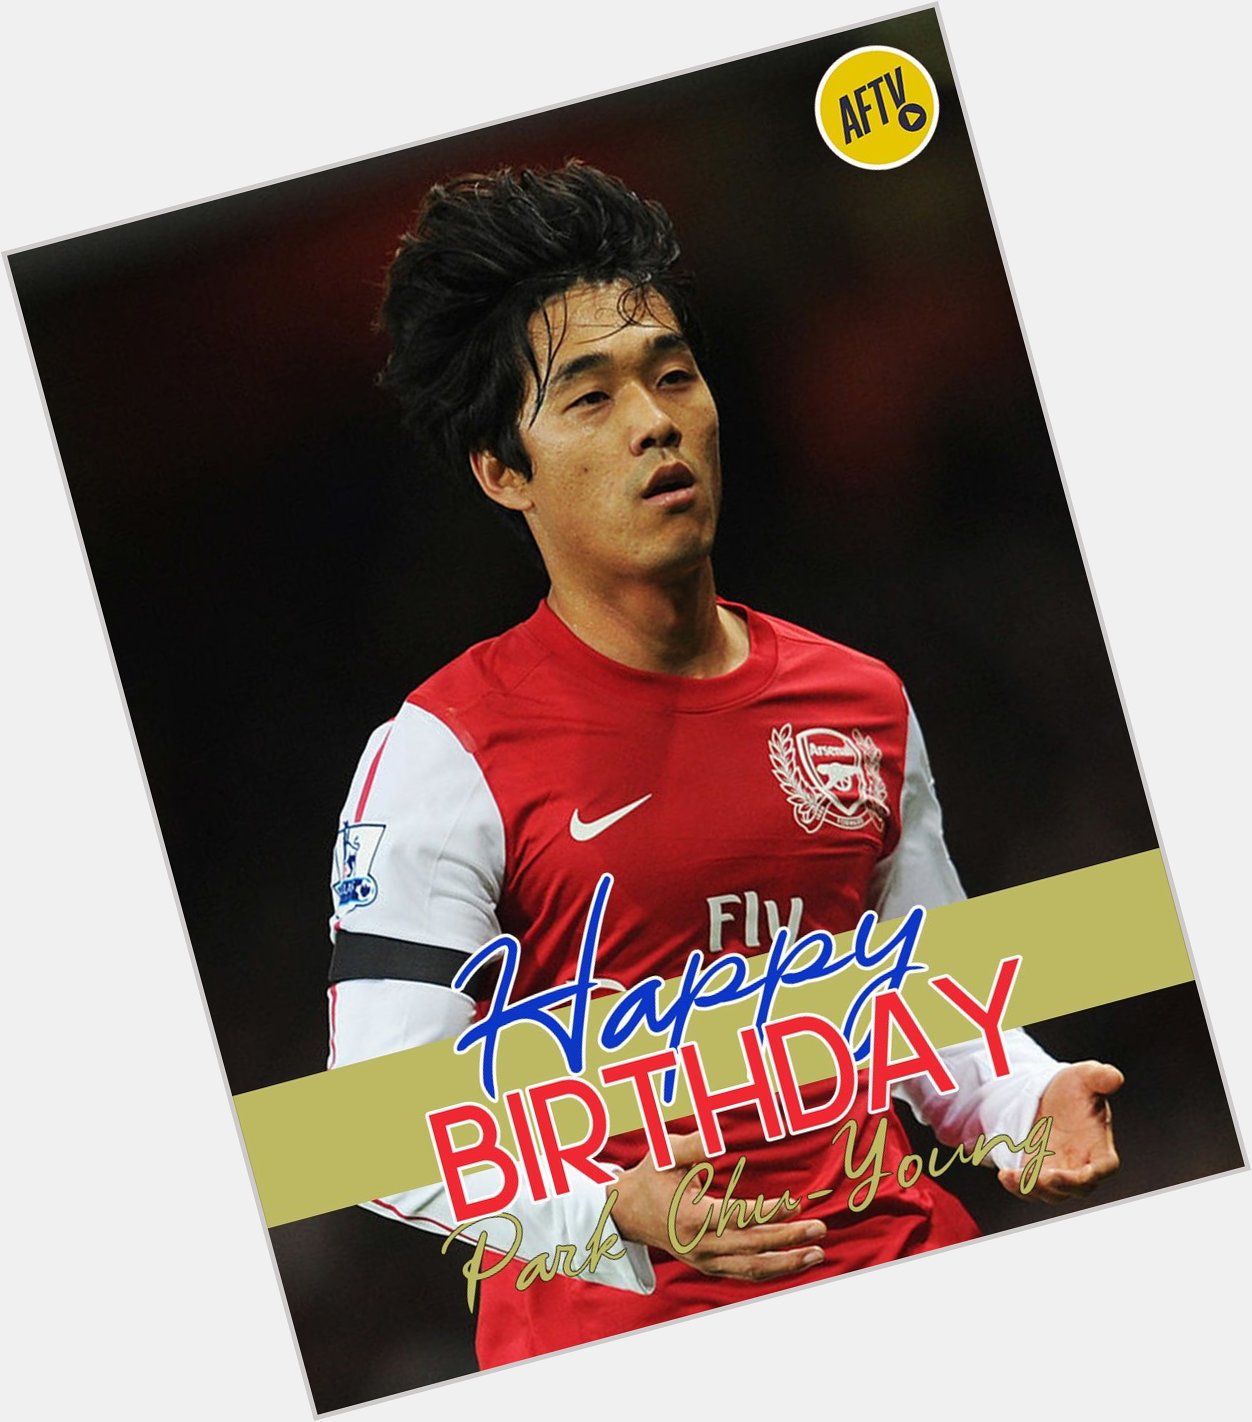  Happy Birthday Park Chu-young!

Park only played 1  Premier League game during his time at Arsenal! 